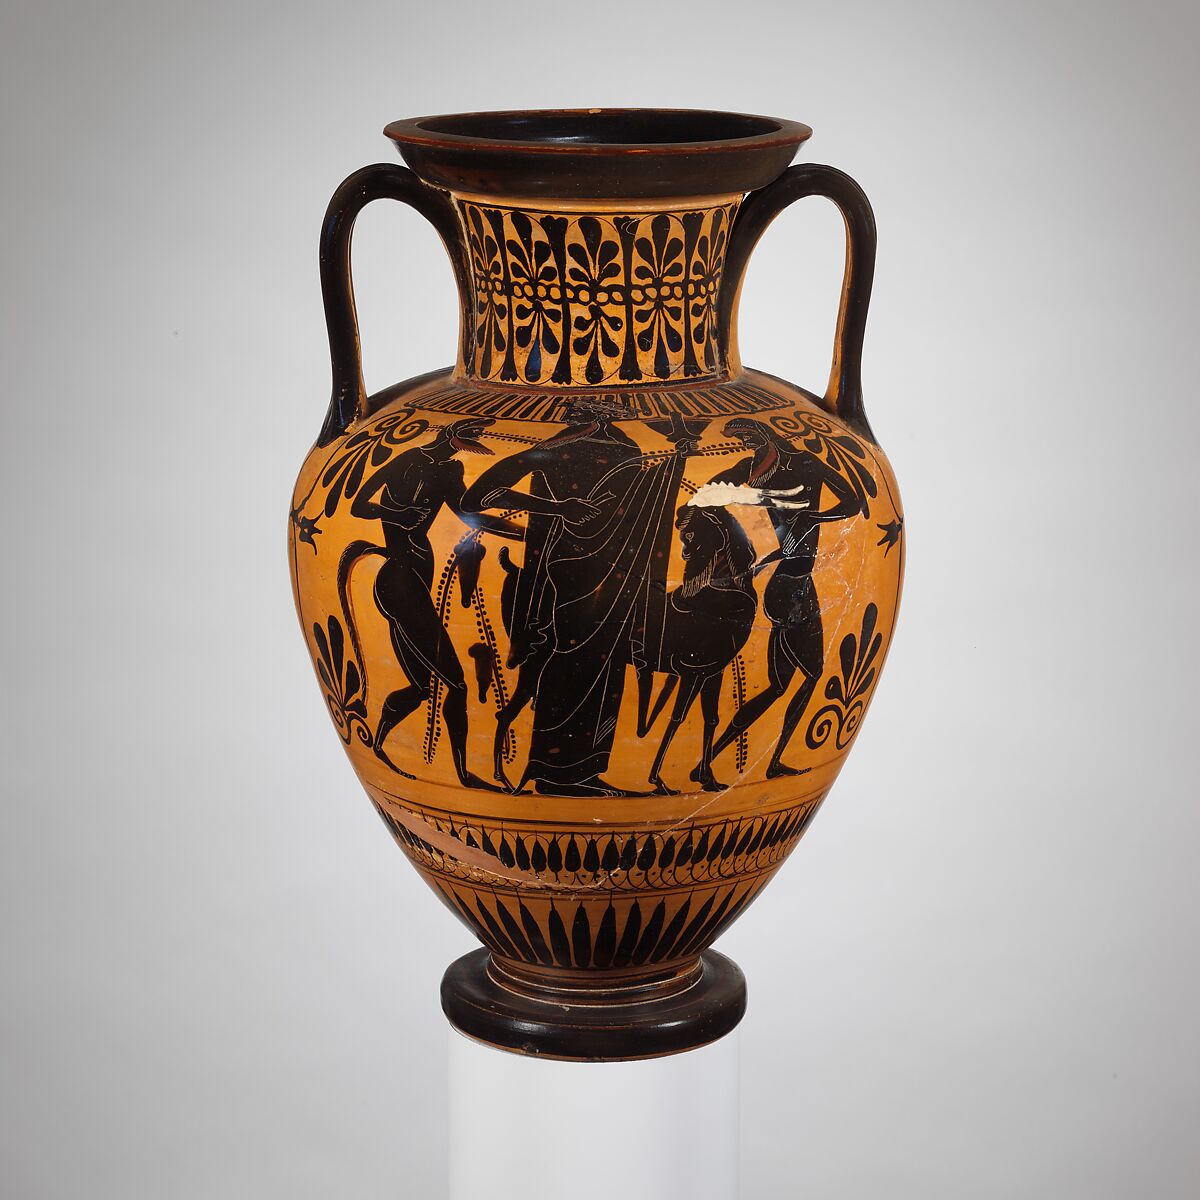 Terracotta neck-amphora (jar), Attributed to the Leagros Group, Terracotta, Greek, Attic 